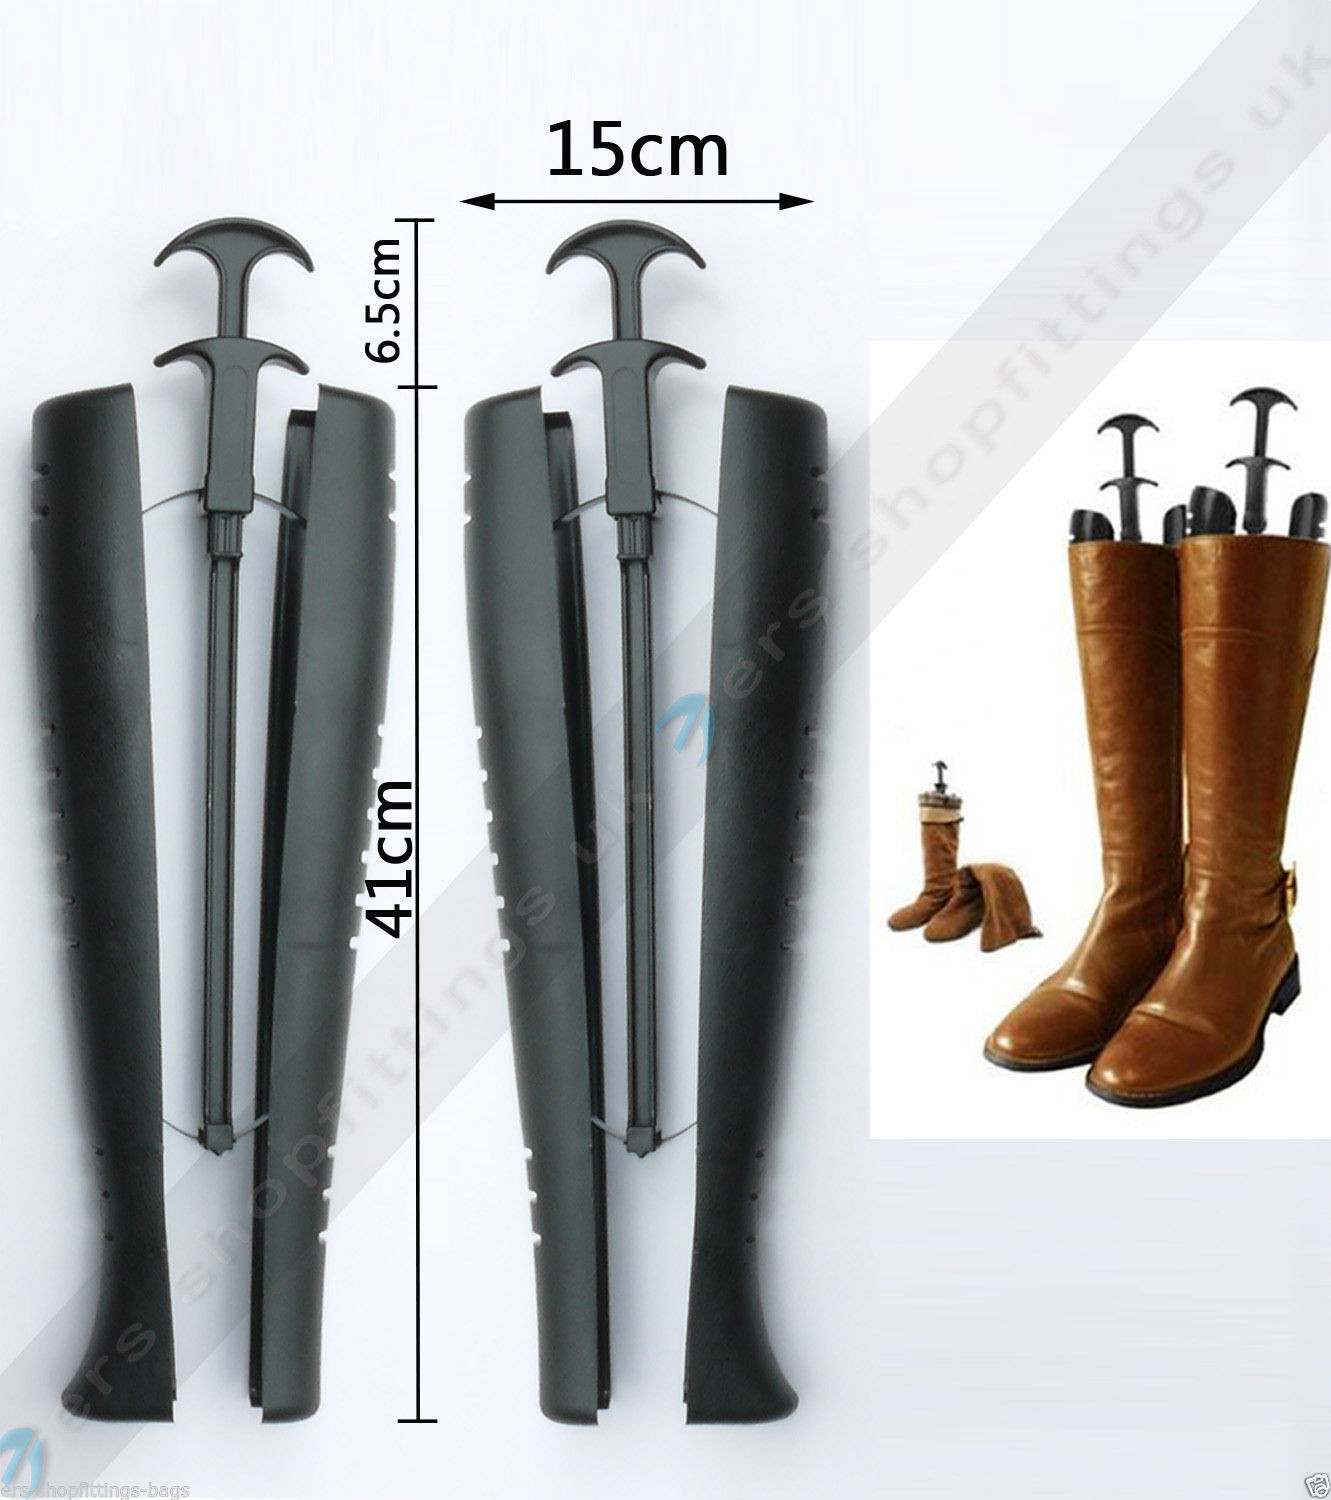 1 Pair Automatic Black Boot Shapers Stand Holder Shoe Tree Stretcher LONG